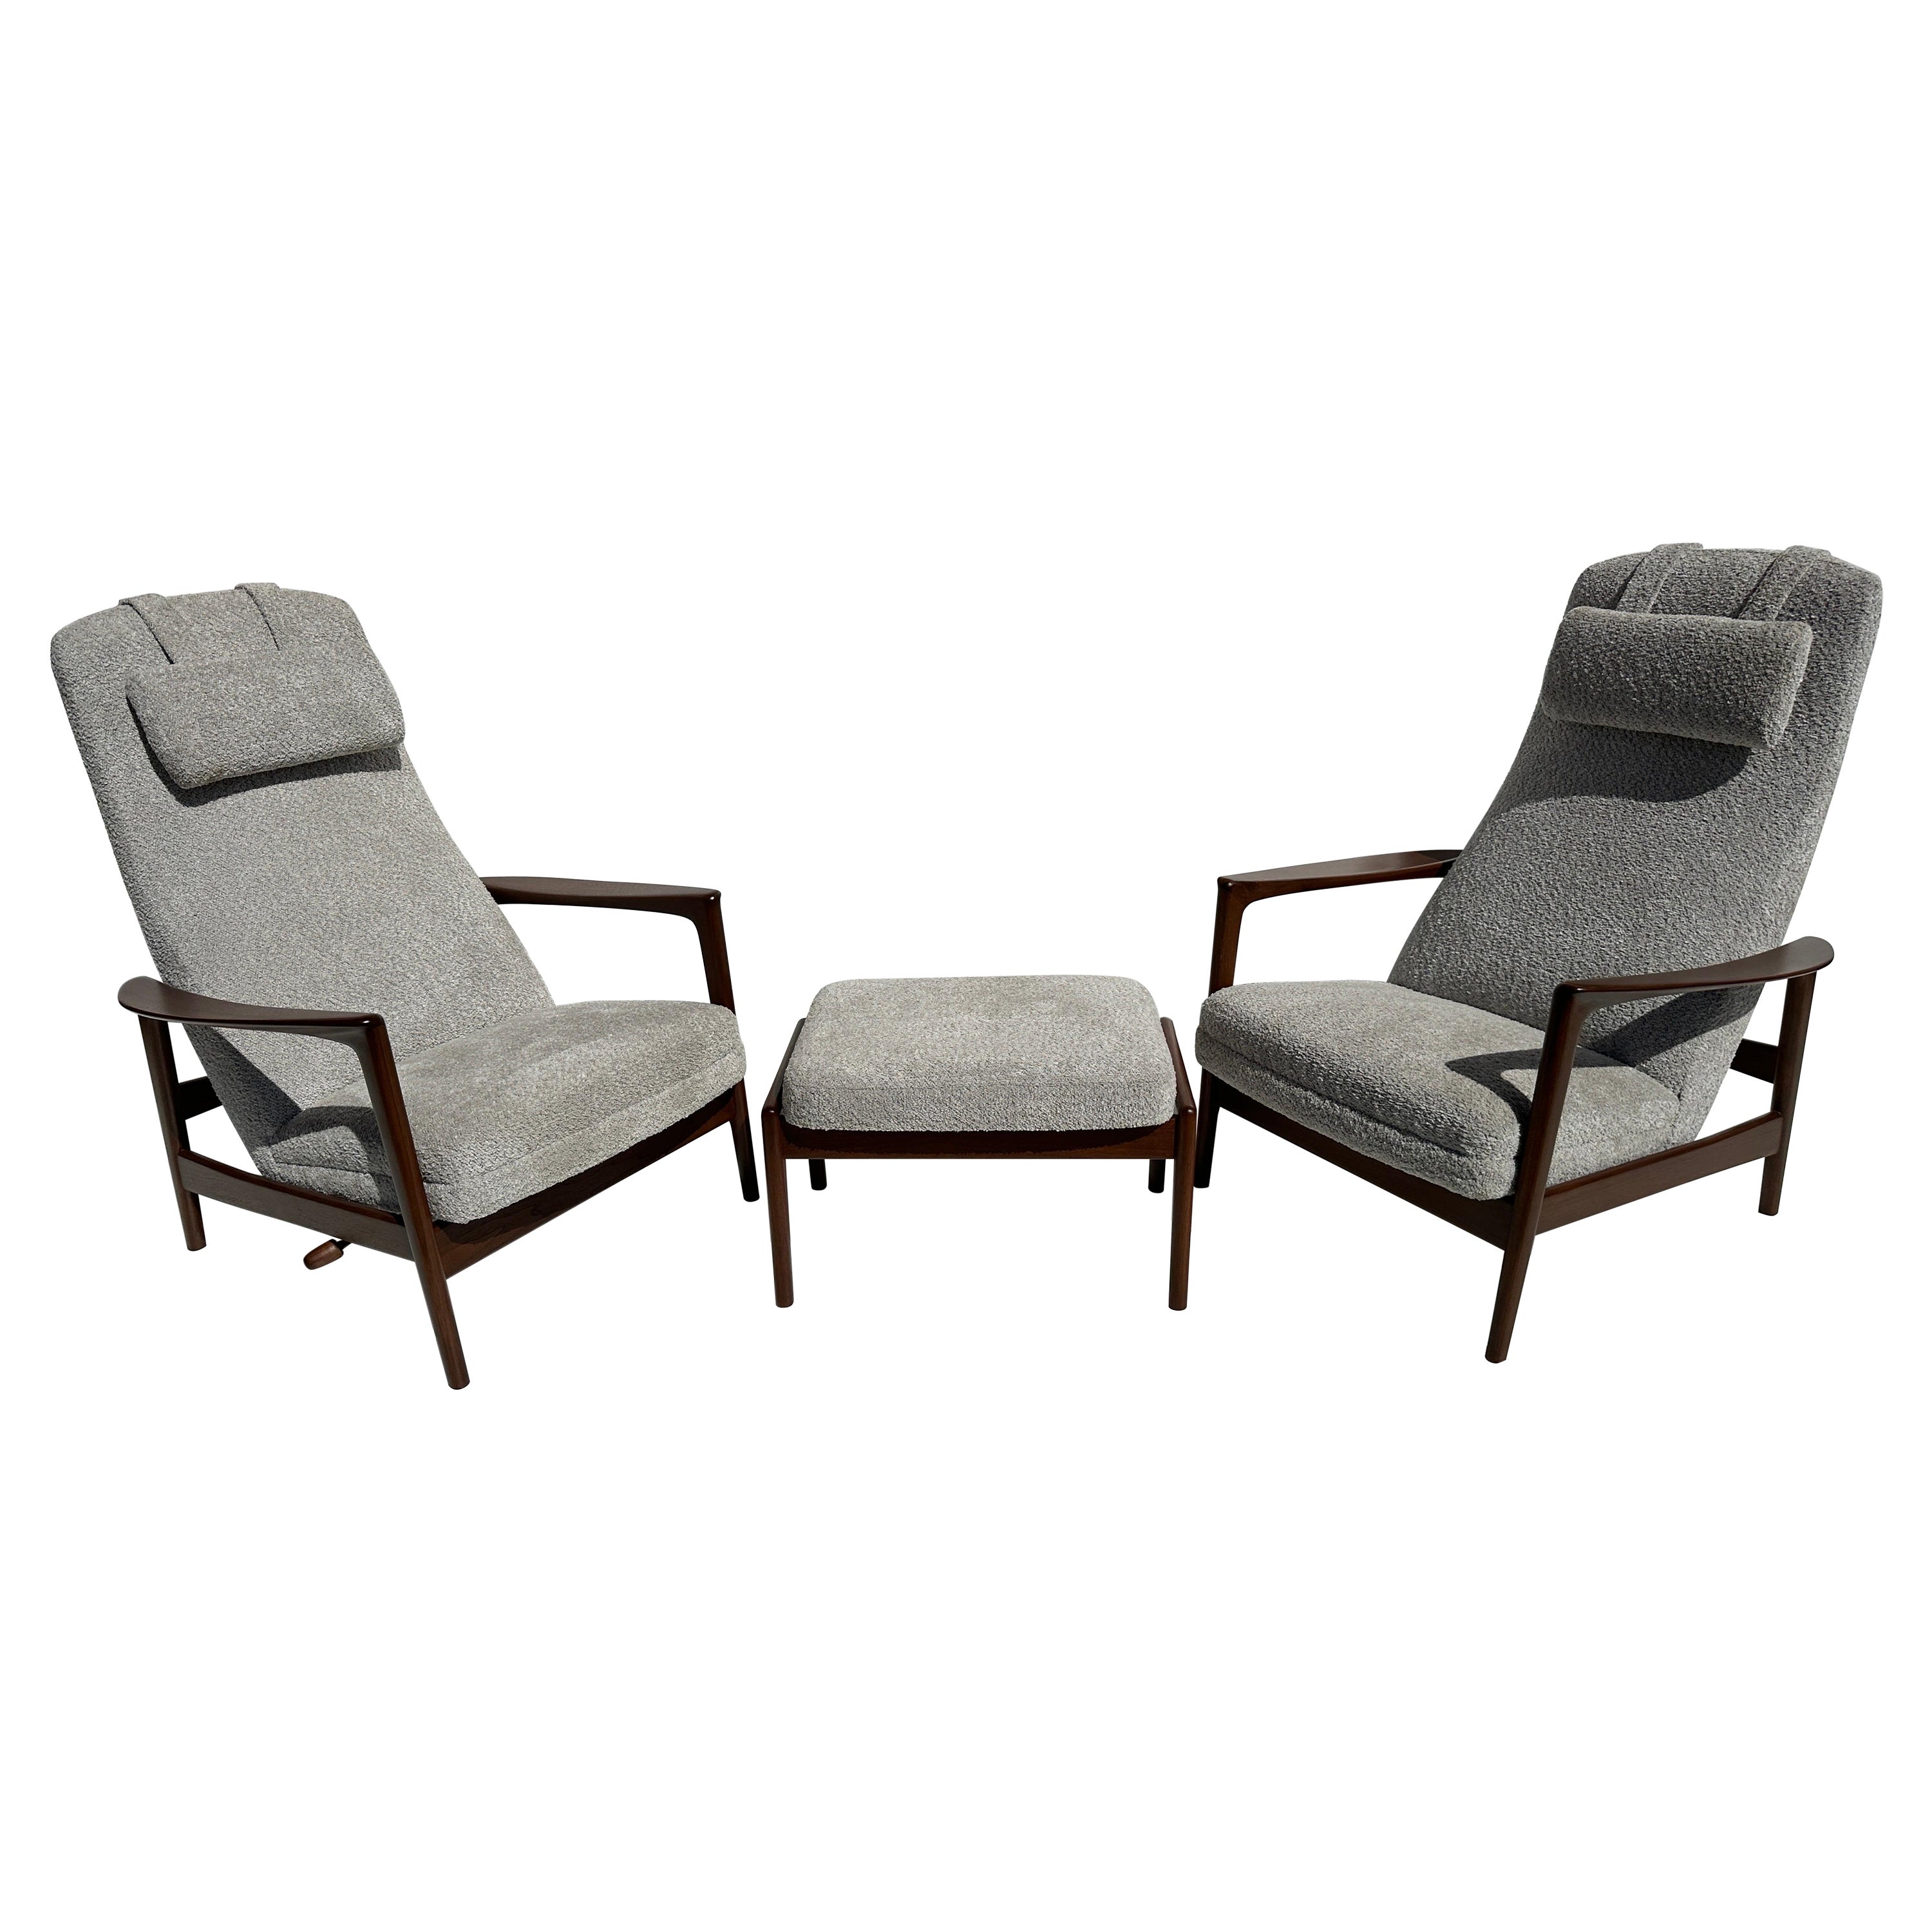 Set of Folke Ohlsson Reclining Lounge Chairs